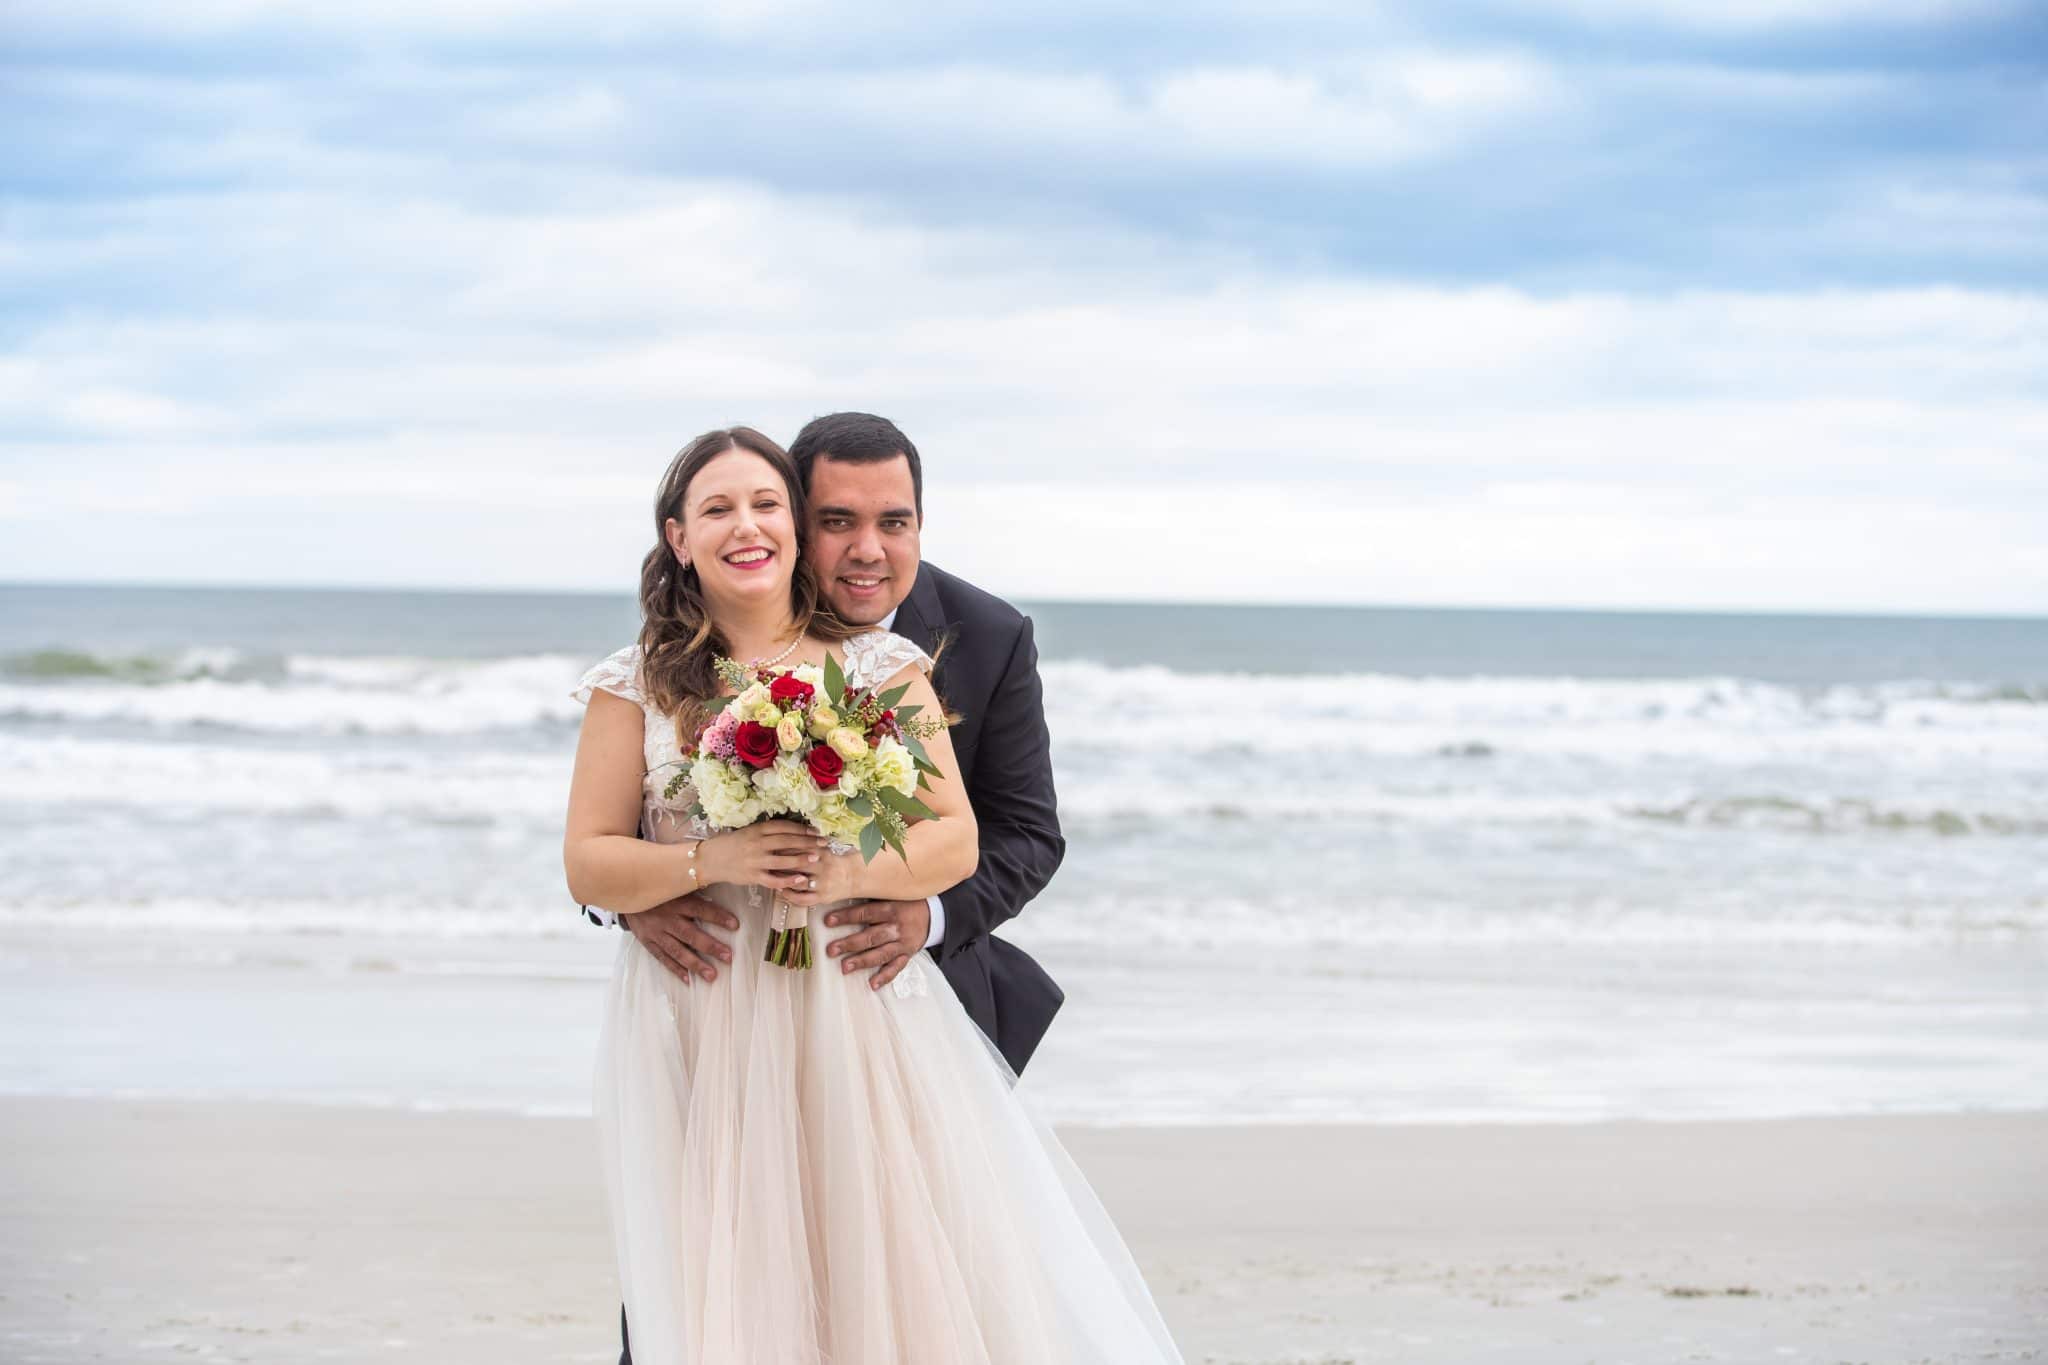 beach wedding photography of a young couple in daytona beach with a wedding dress, bouquet. Groom is standing behind the bride embracing her as they pose for a photo on the beach